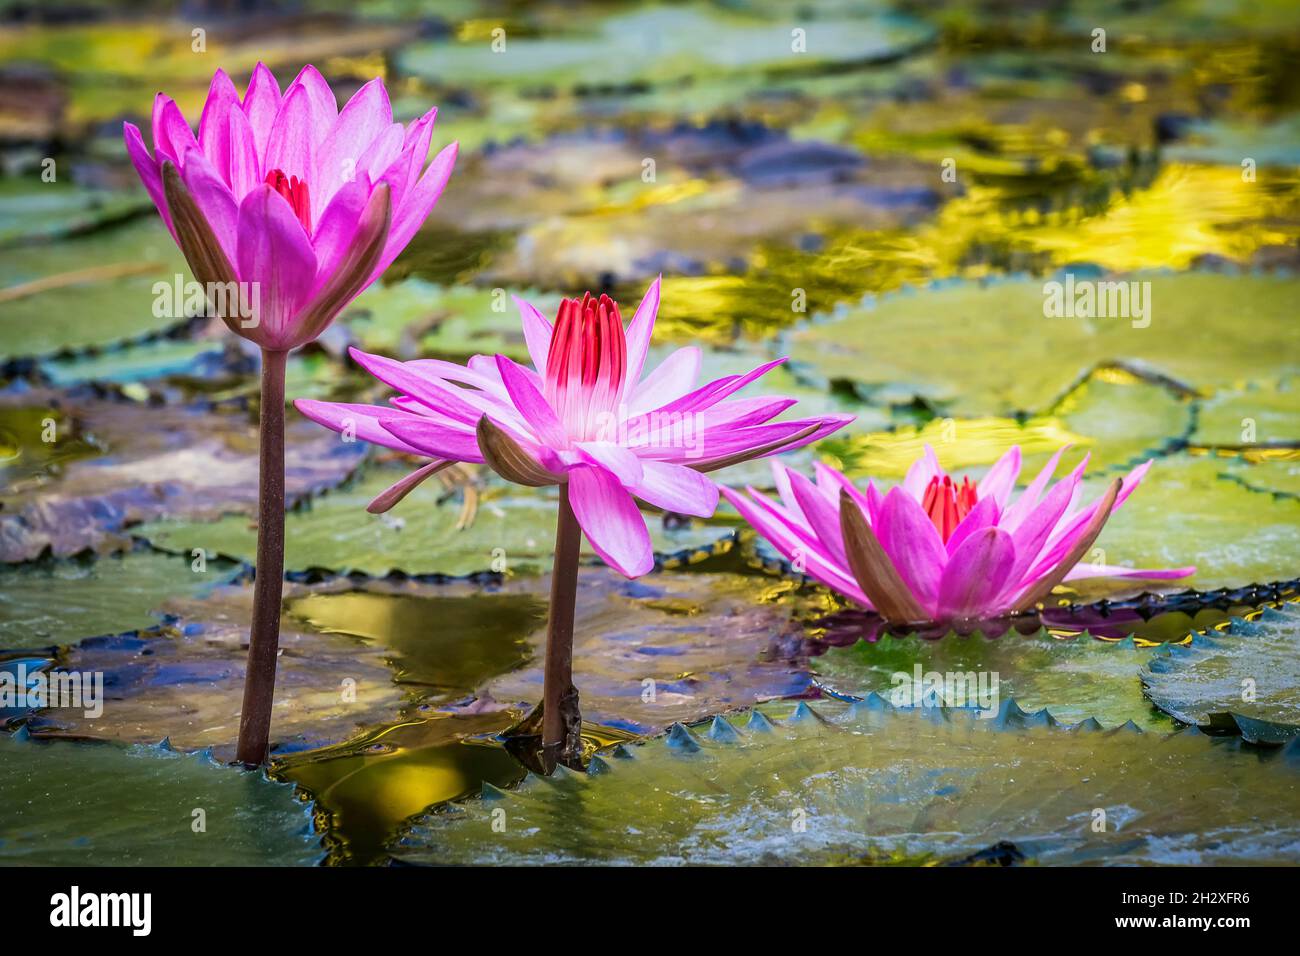 Three beautiful pink purple flowers of water lily or lotus flower Nymphaea in old verdurous pond. Big leaves of waterily cover water surface. Water pl Stock Photo